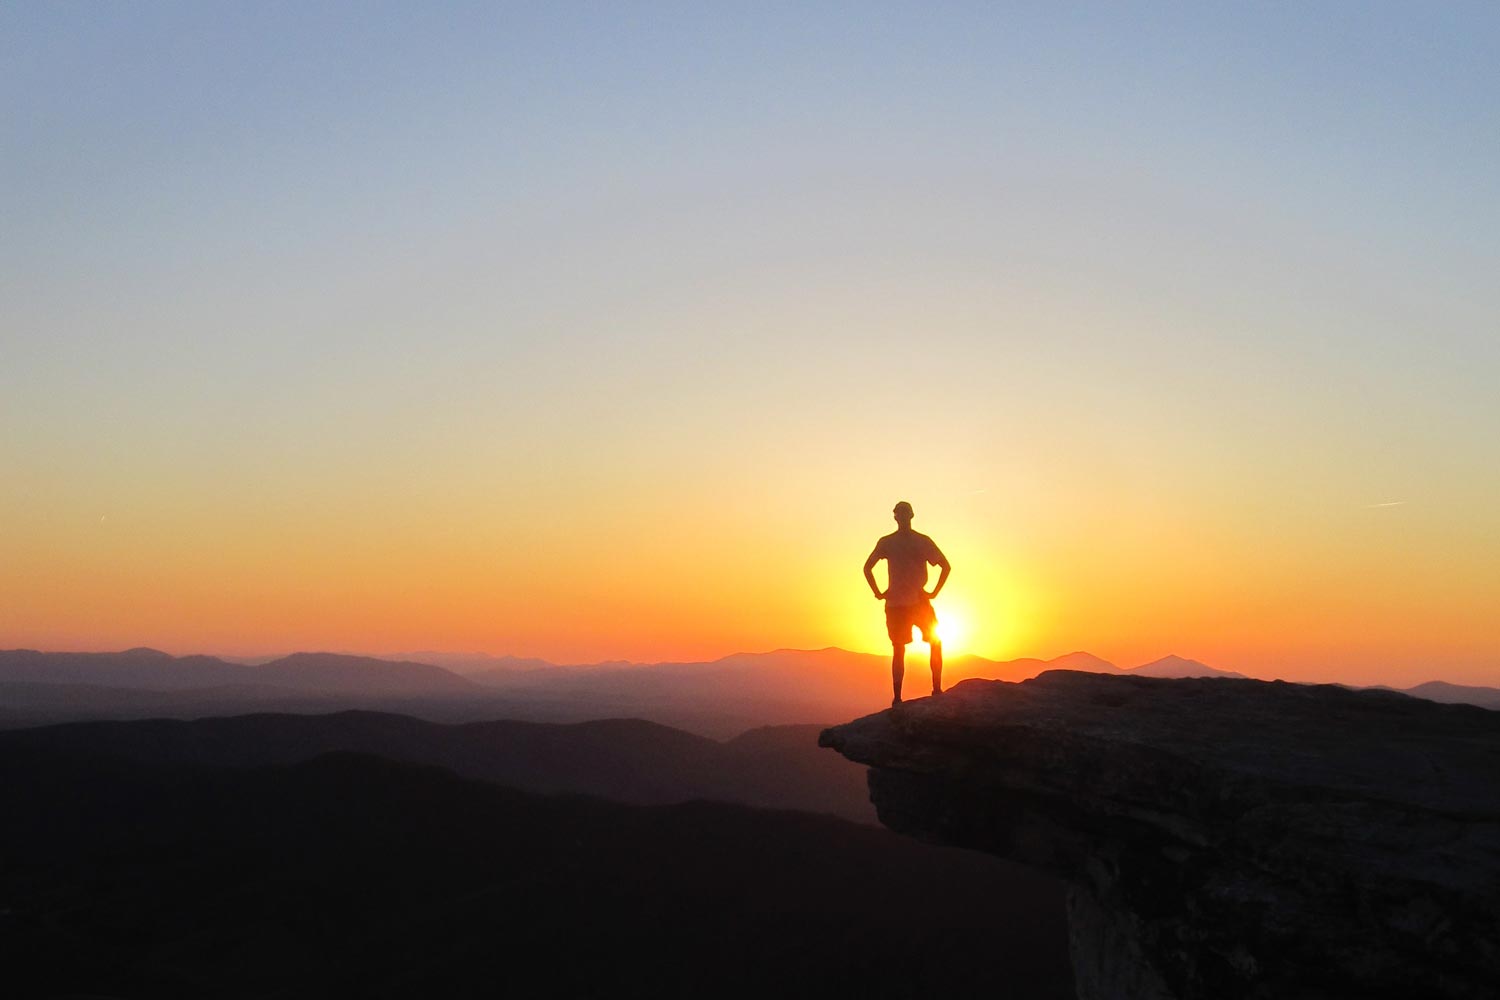 Silhouette of a man standing on a rock ledge during sunset